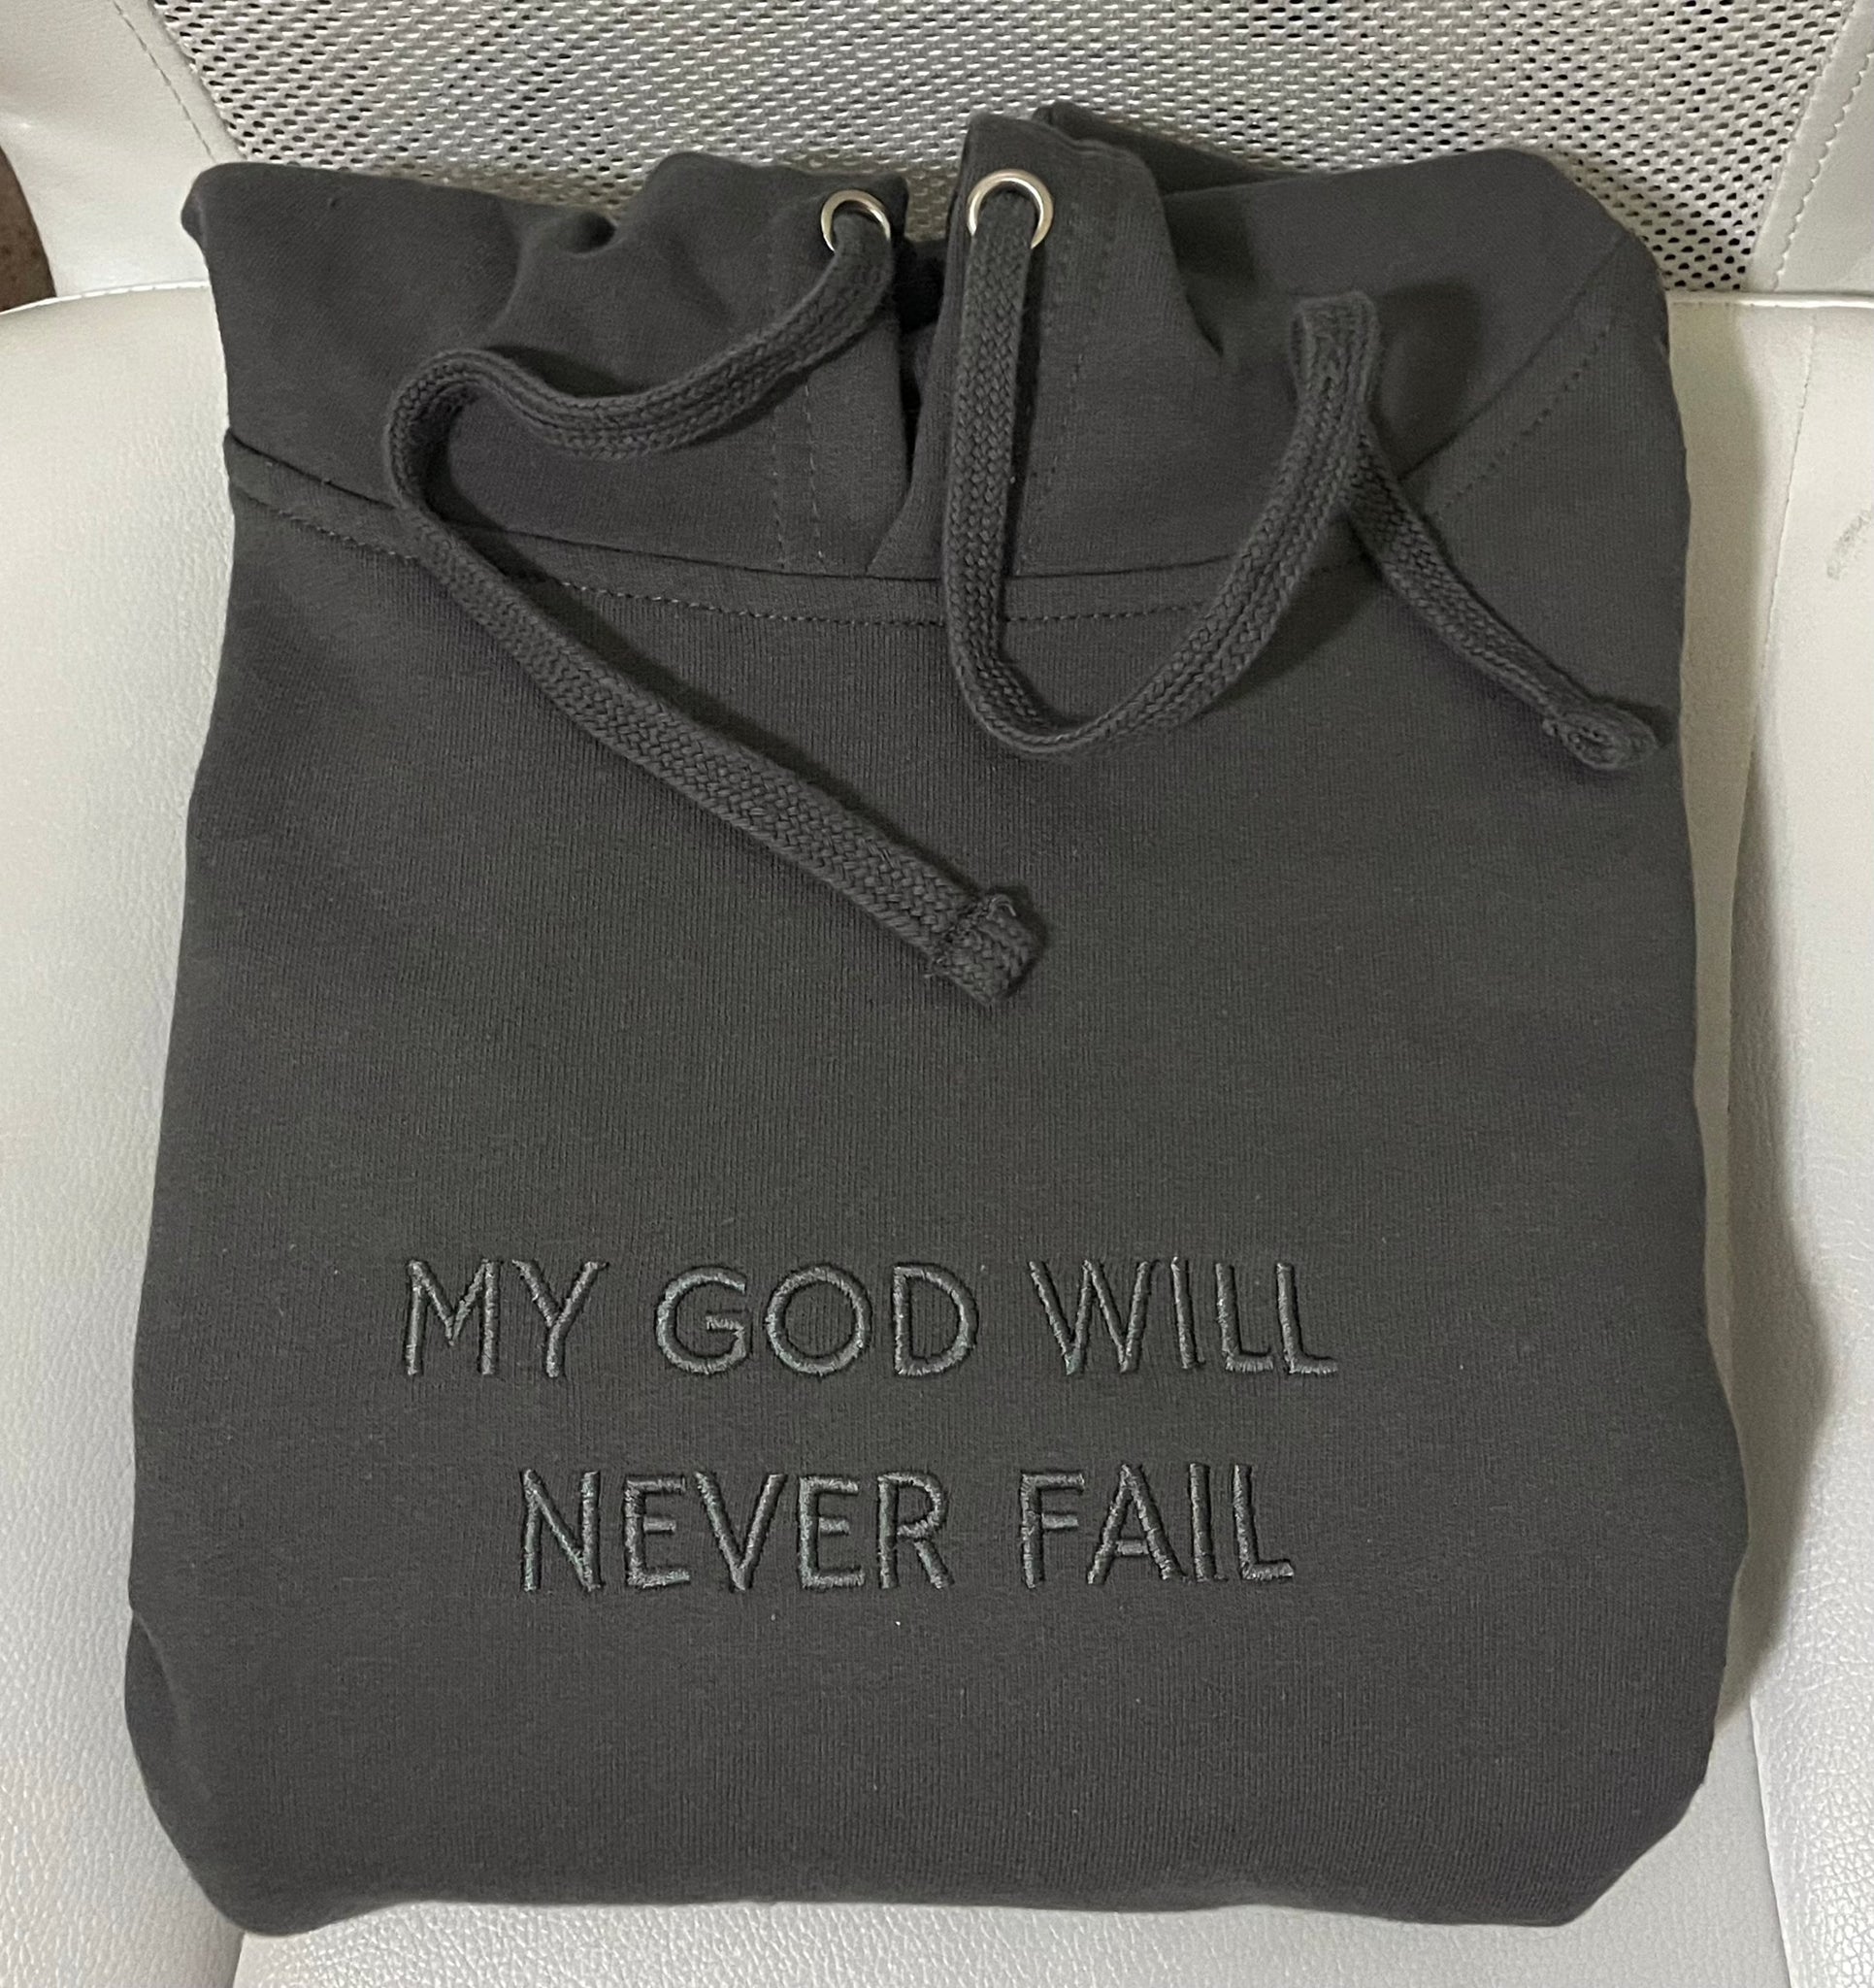 My God will never fail  Embroidered Premium Hoodie - Apparel for God LLC